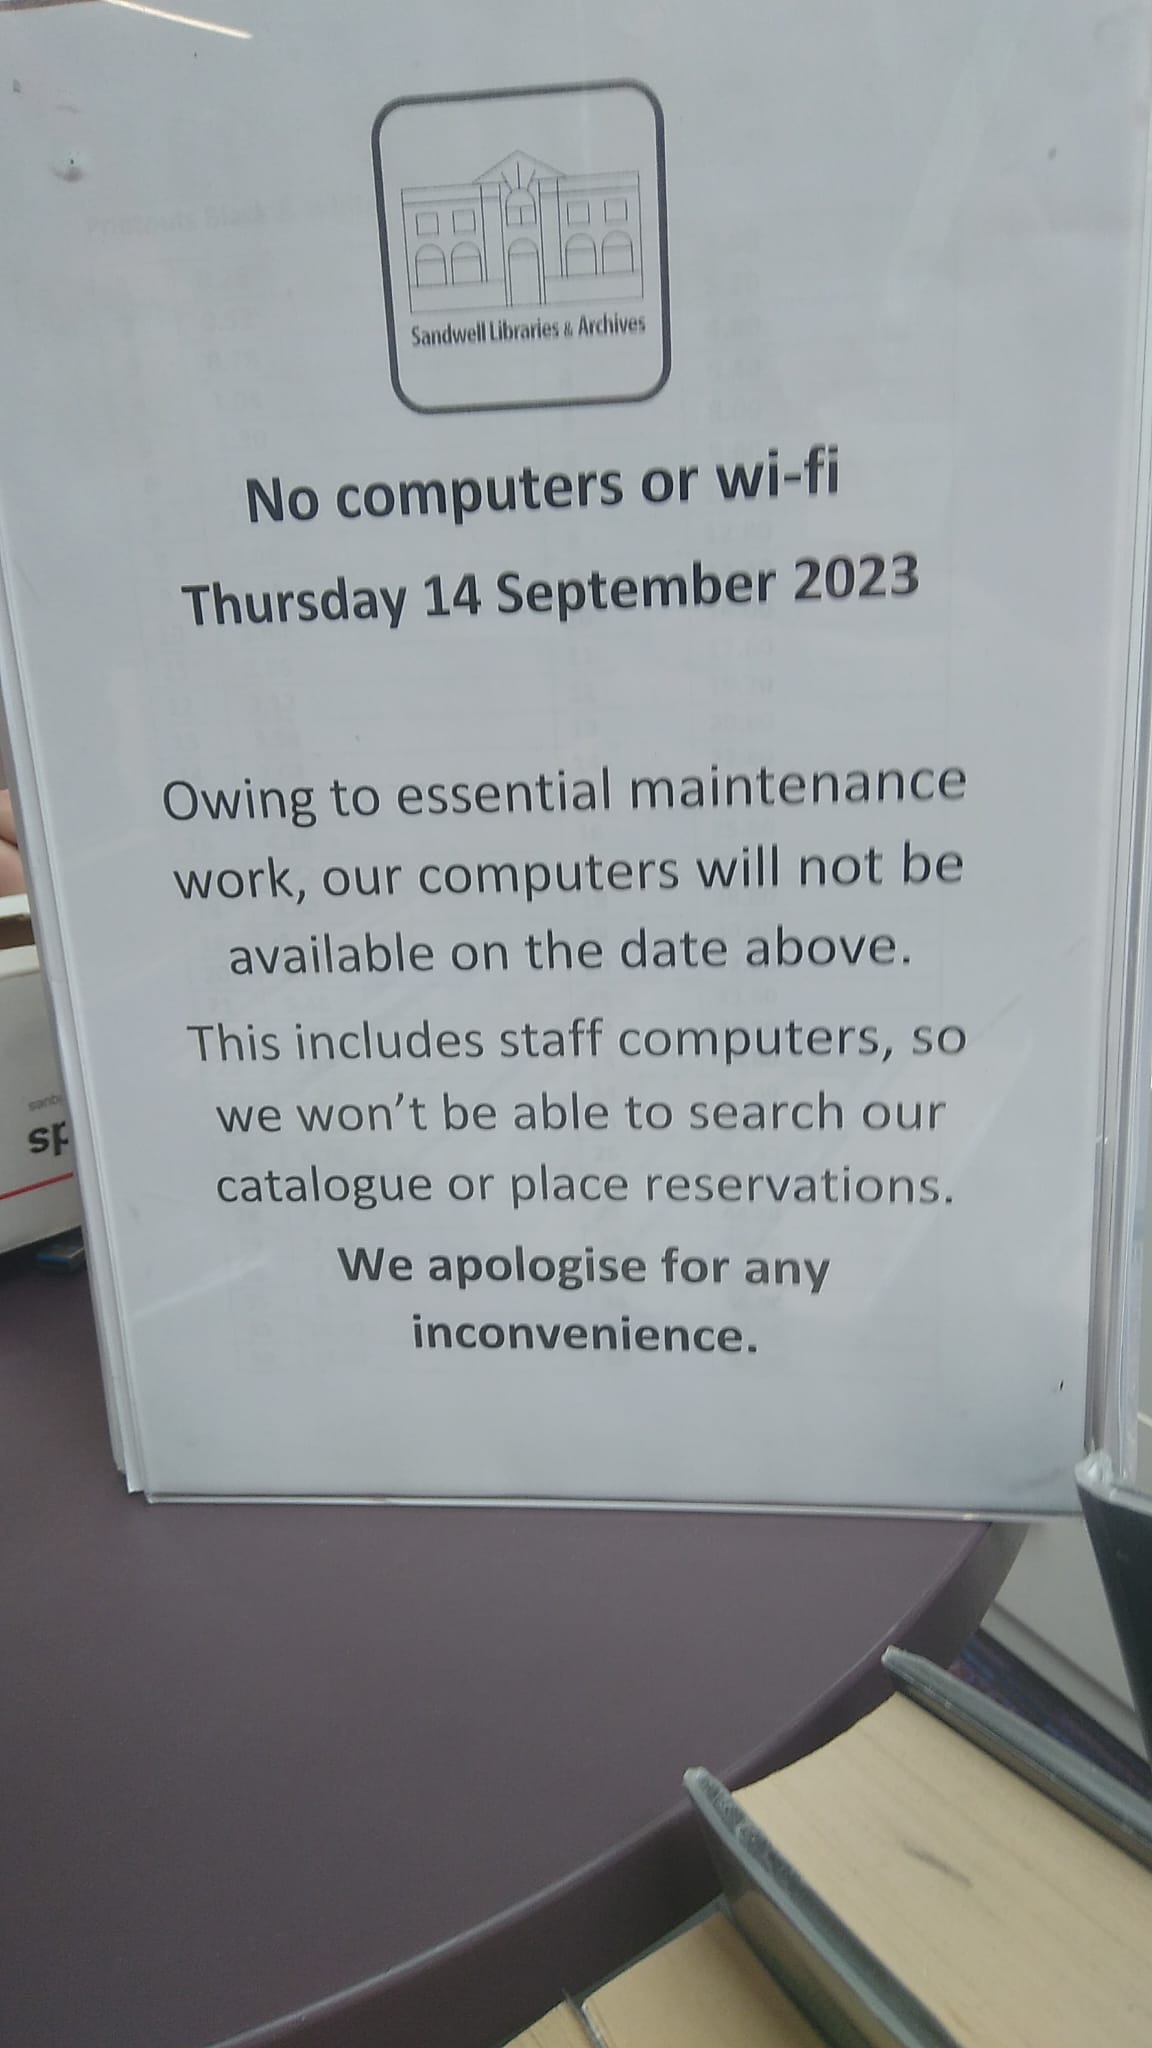 West Bromwich Library will not have any WiFi. There won’t be any use of computers on the 14th of September